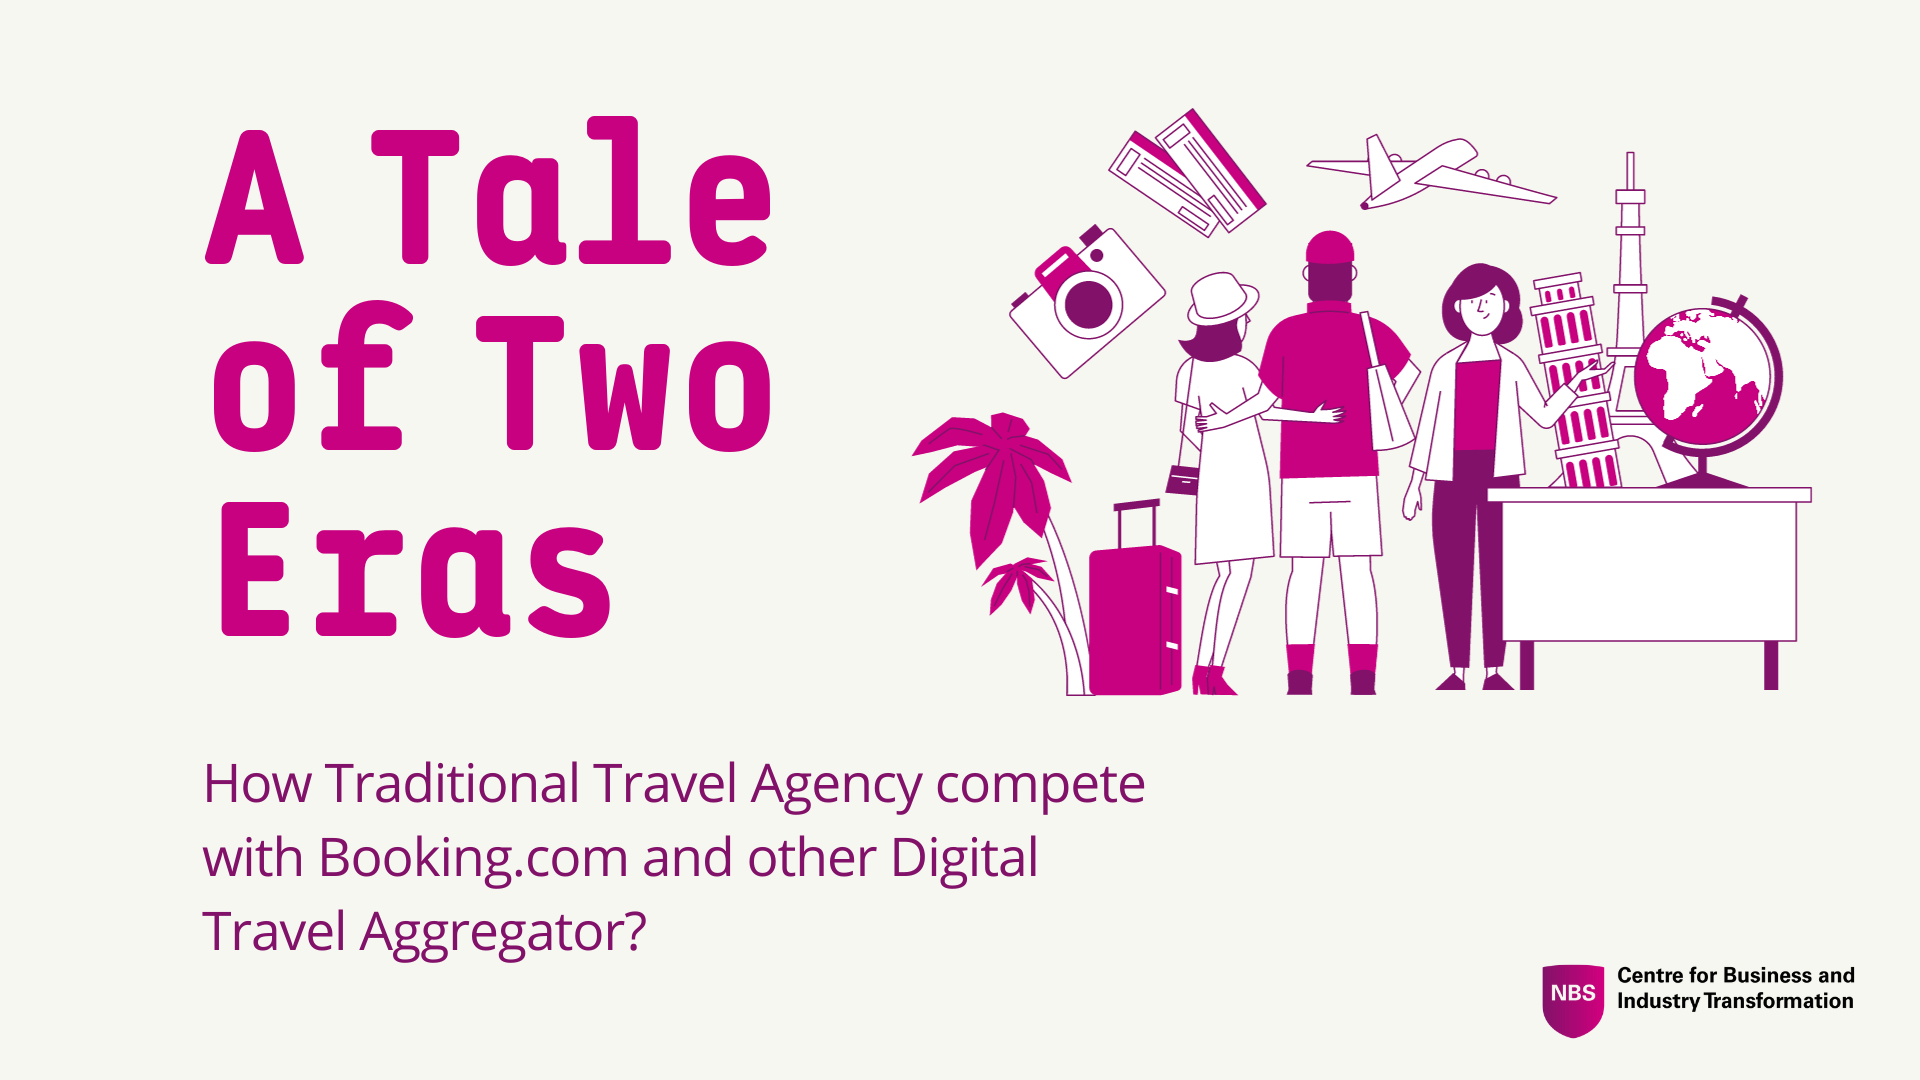 A Tale of Two Eras – How Does a Traditional Travel Agency compete with Booking.com and other Digital Travel Aggregators?